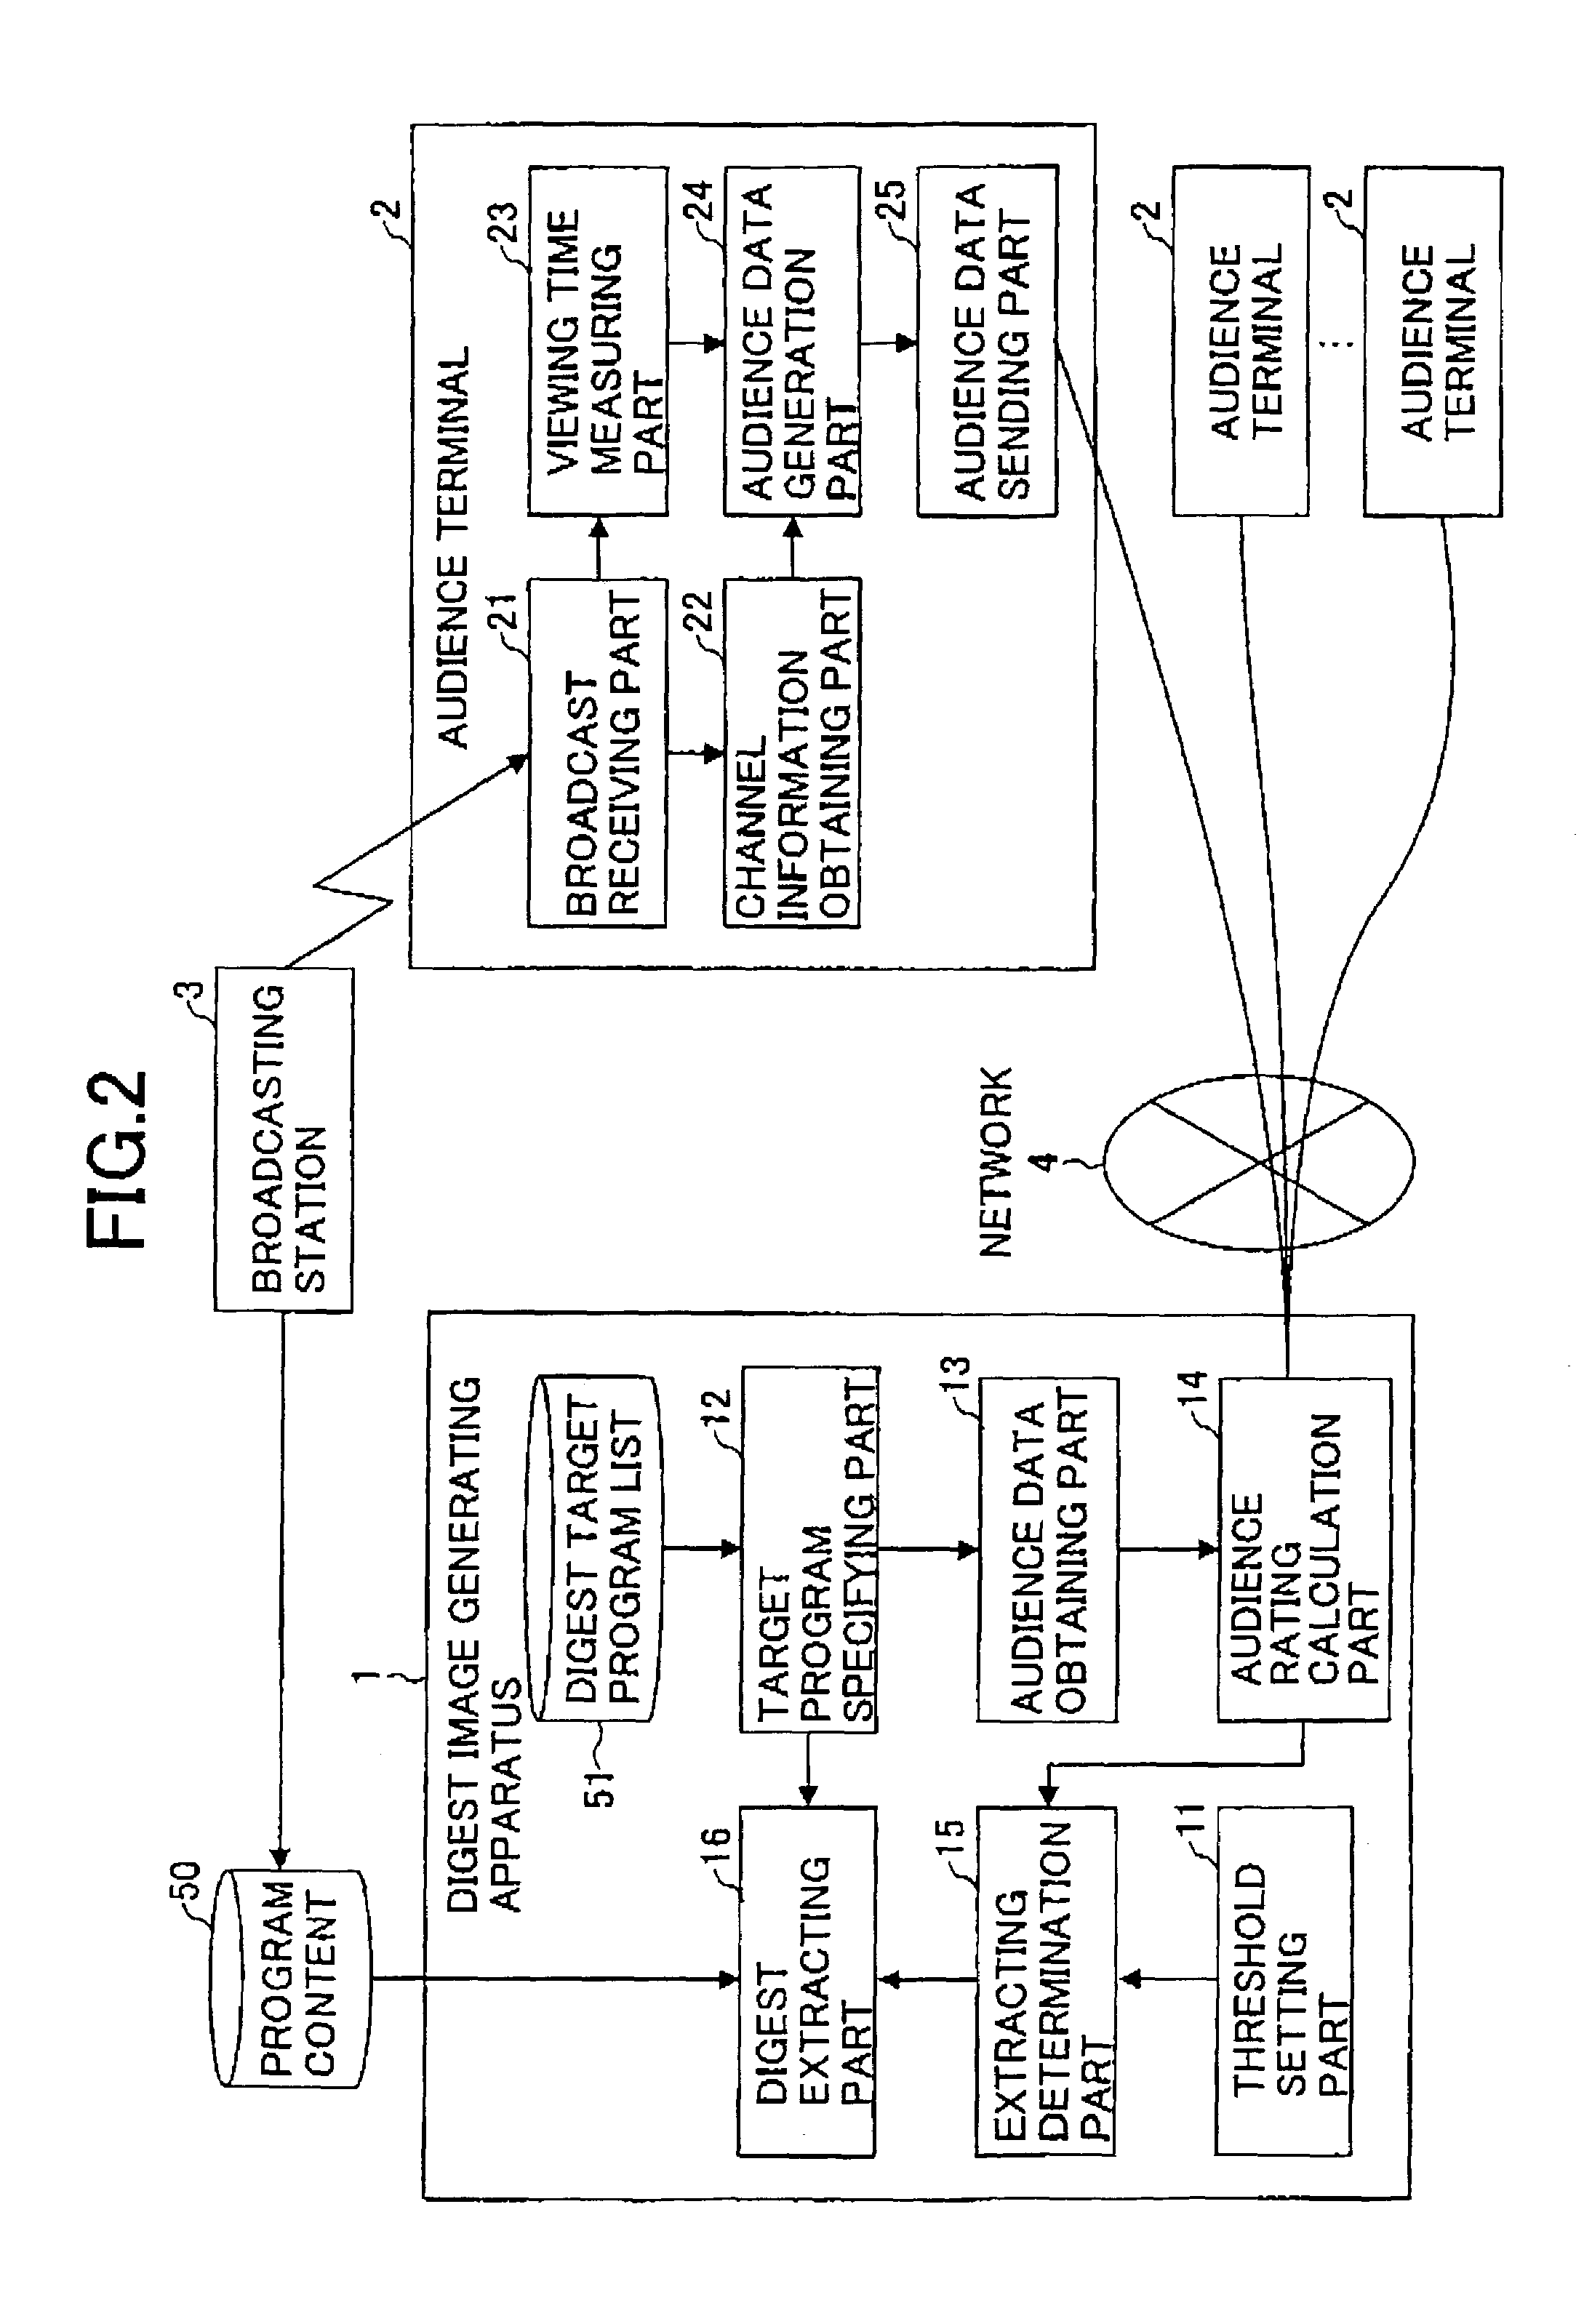 Digest generation method and apparatus for image and sound content